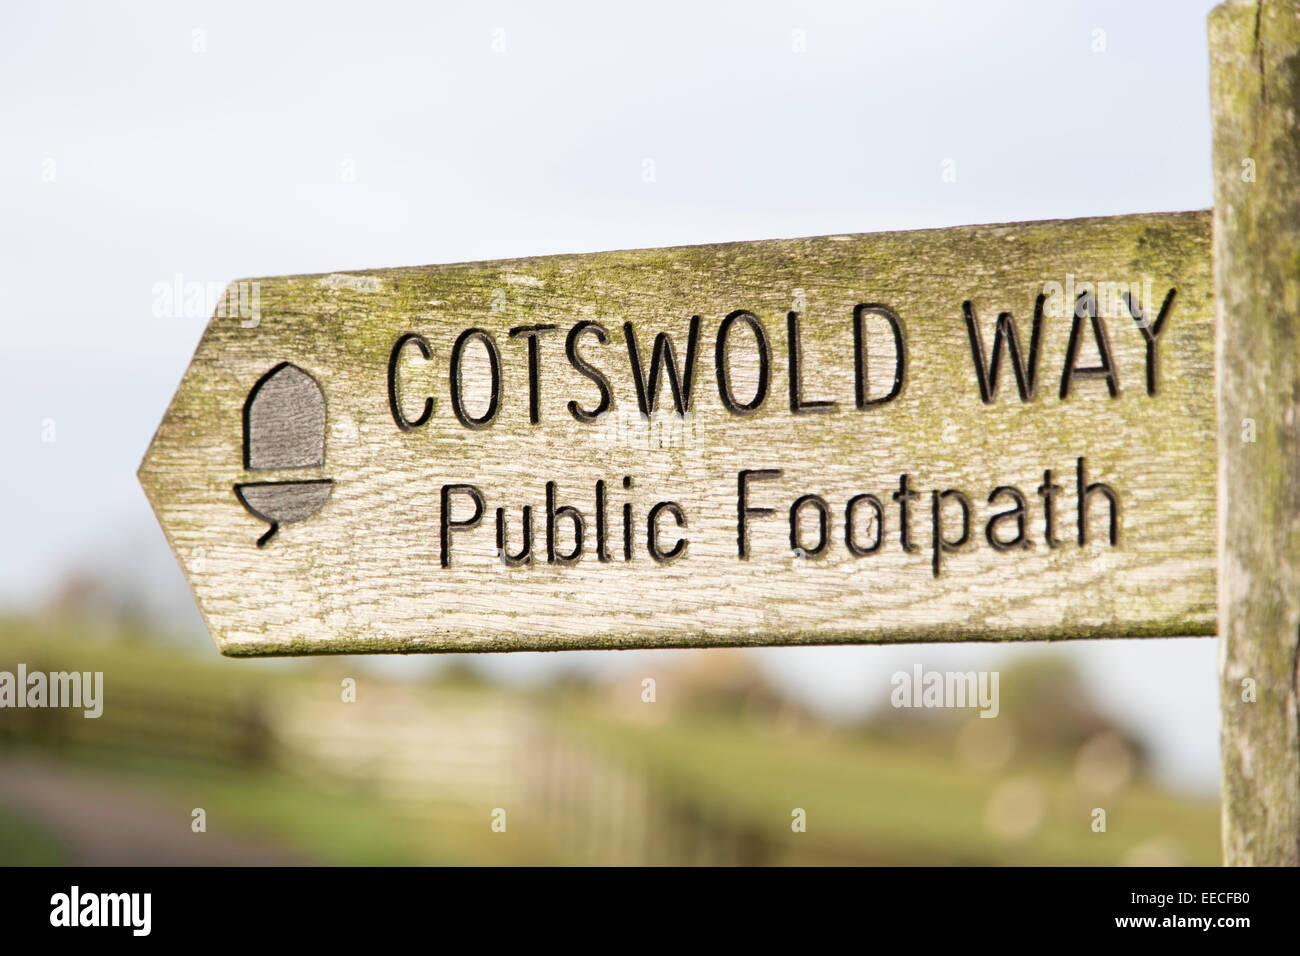 Public footpath sign for the Cotswold Way long distance footpath, England, UK Stock Photo